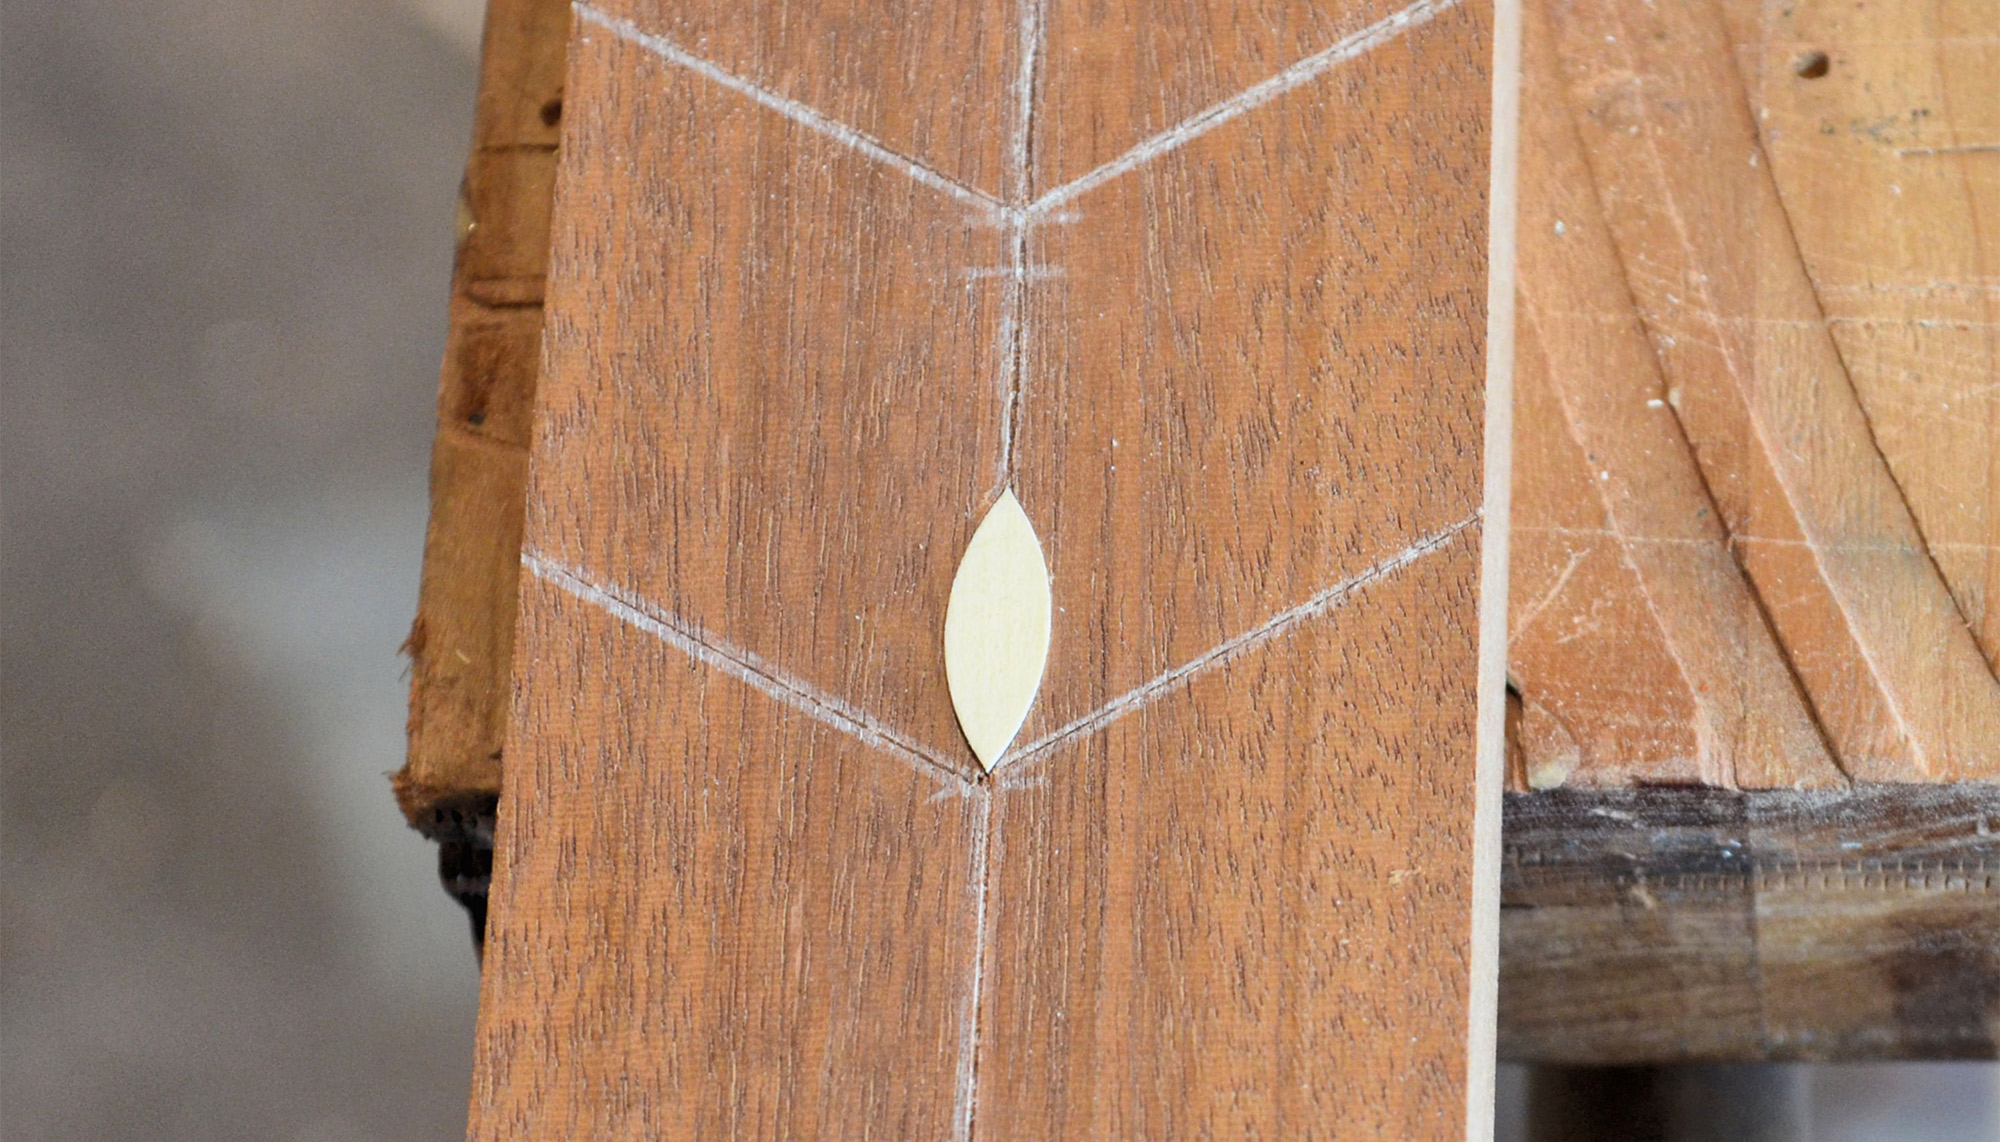 Center leaf inlaid into the pocket